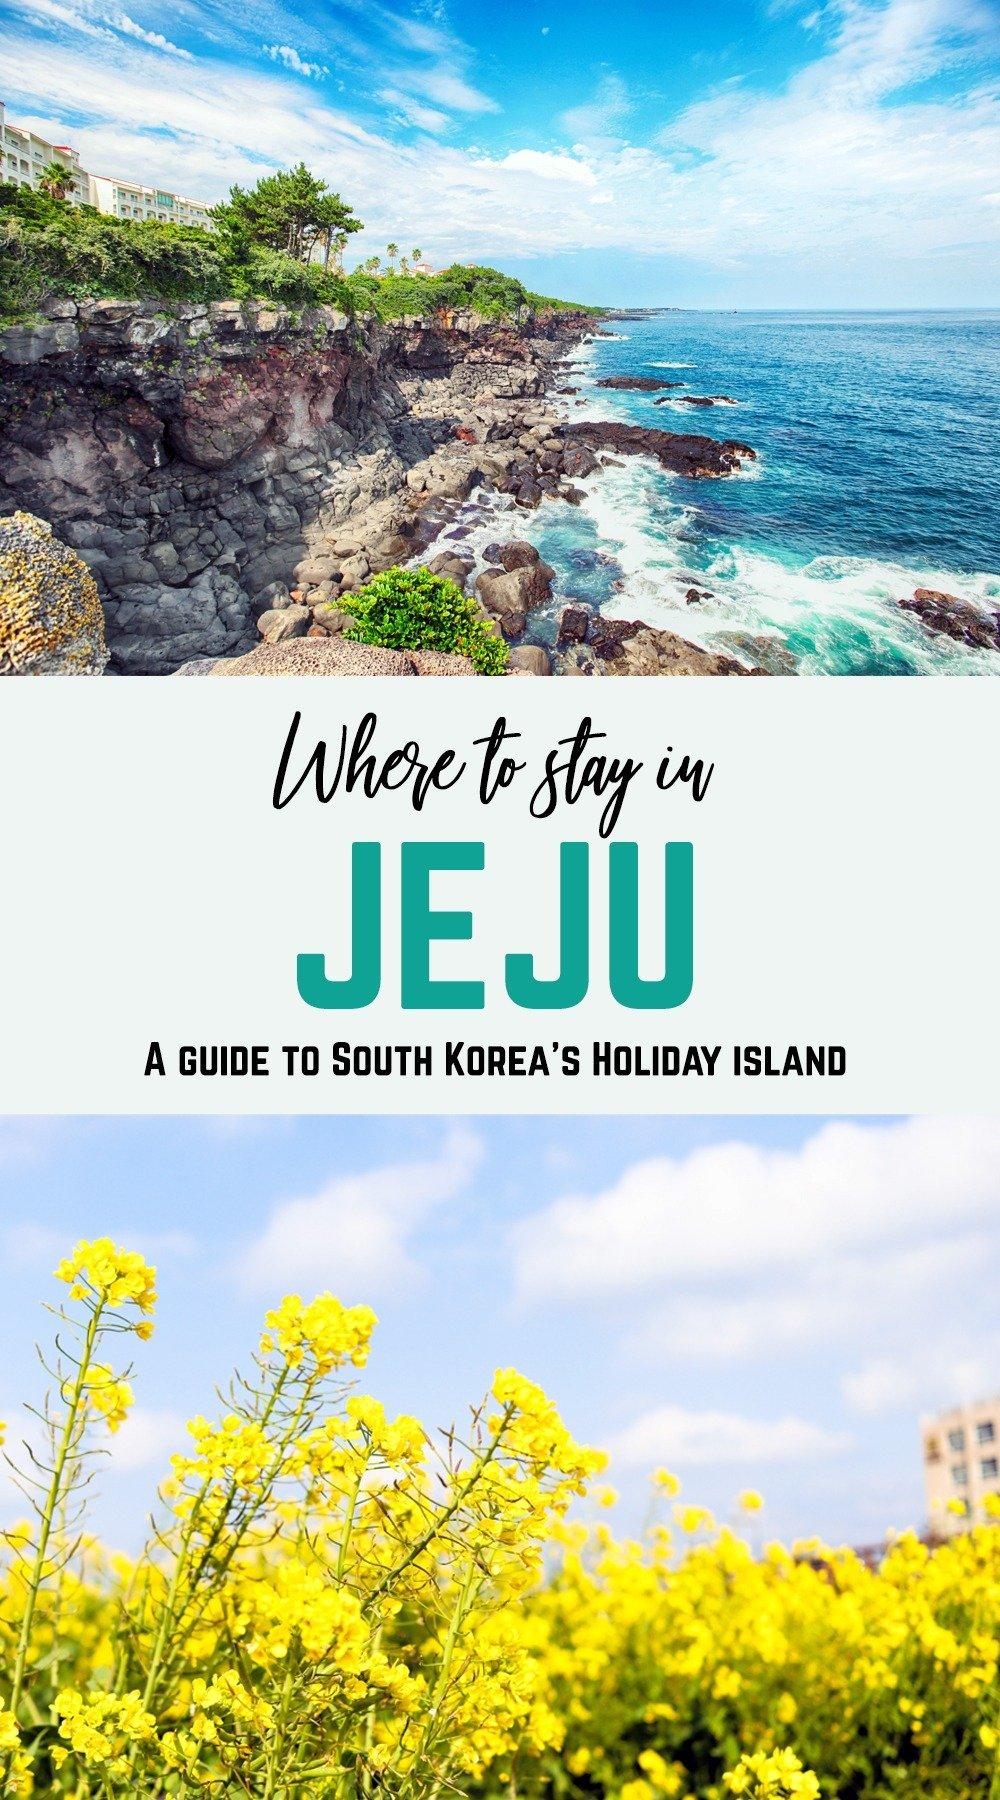 Jeju Island is one of South Korea’s best summer destinations. With beautiful beaches, stunning natural landscapes, and all kinds of quirky sights, there’s so much to see and do in this “island of the gods.” Plan your trip and get ready for an exciting holiday - here’s where to stay in Jeju.